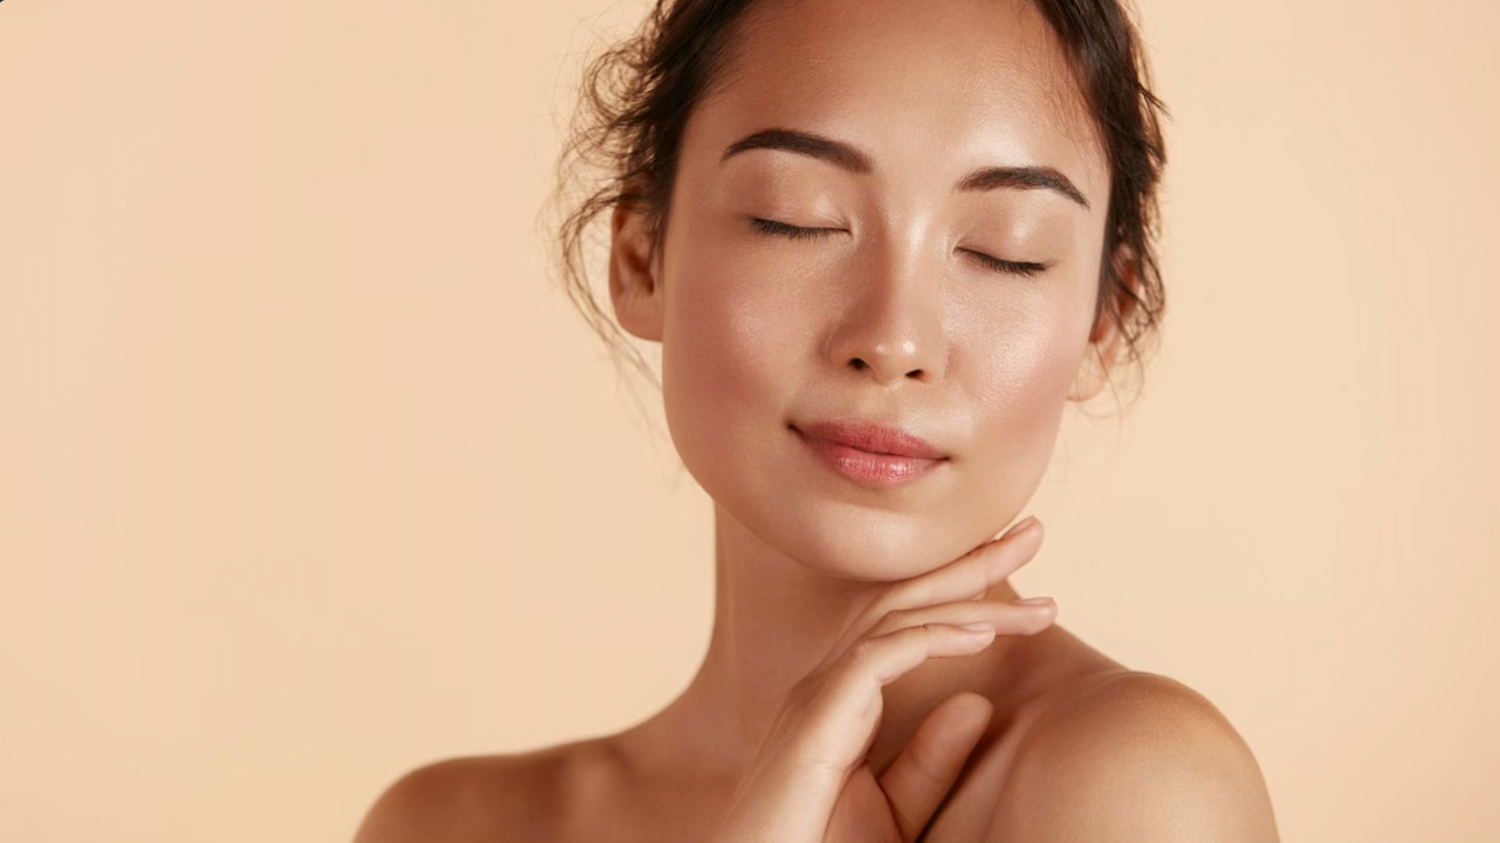 WHAT YOU NEED TO KNOW ABOUT OILY SKIN & MOISTURIZERS